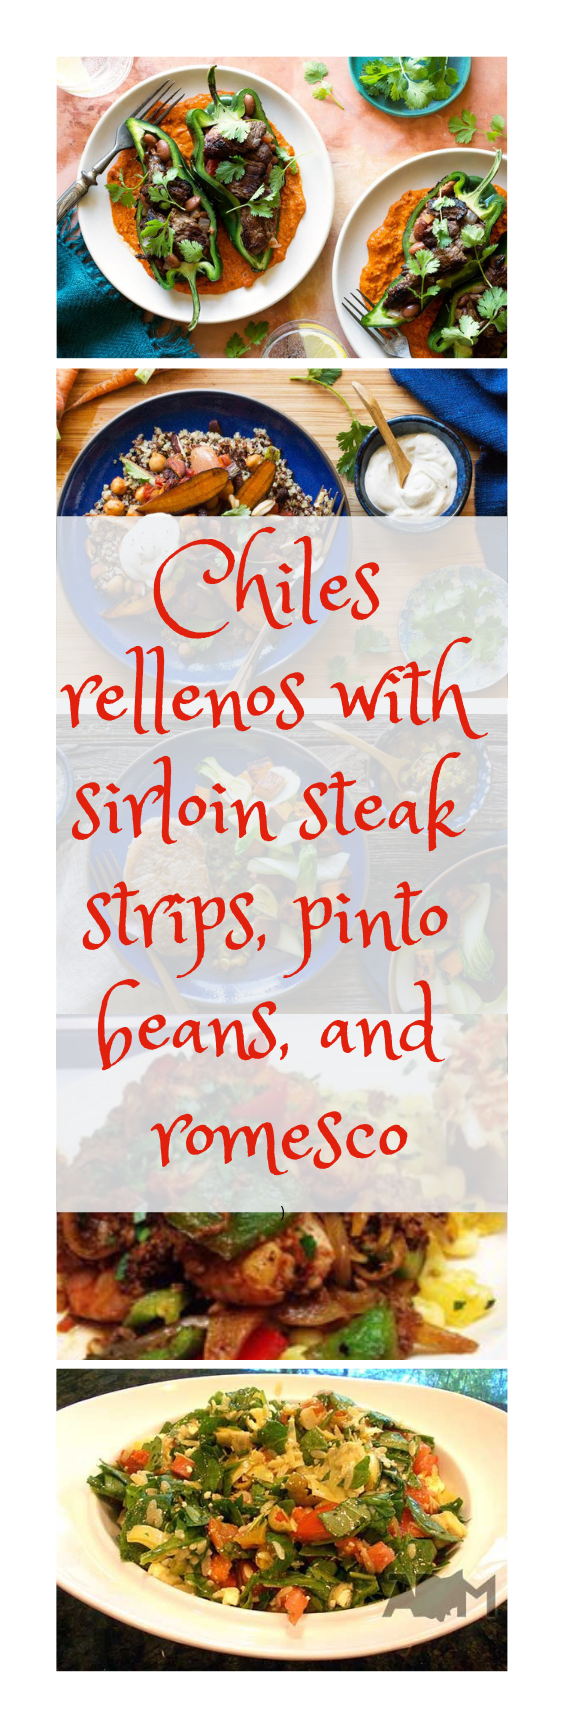 Chiles rellenos with sirloin steak strips, pinto beans, and romesco